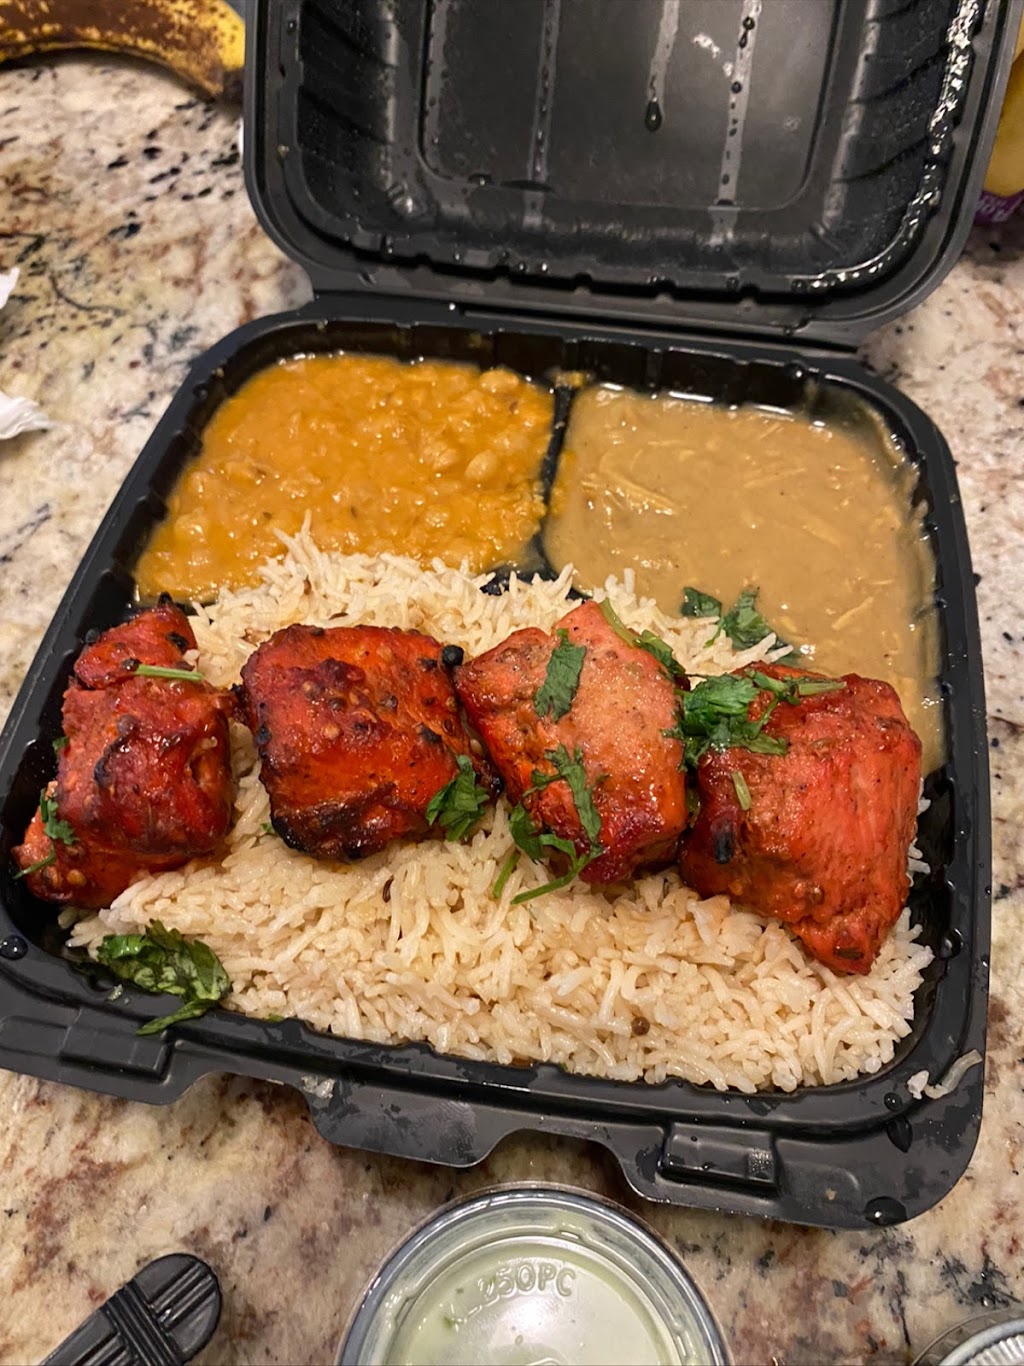 4 Sisters Kabob and curry | 1243 Shopping Center Rd, Stevensville, MD 21666, USA | Phone: (443) 249-3005